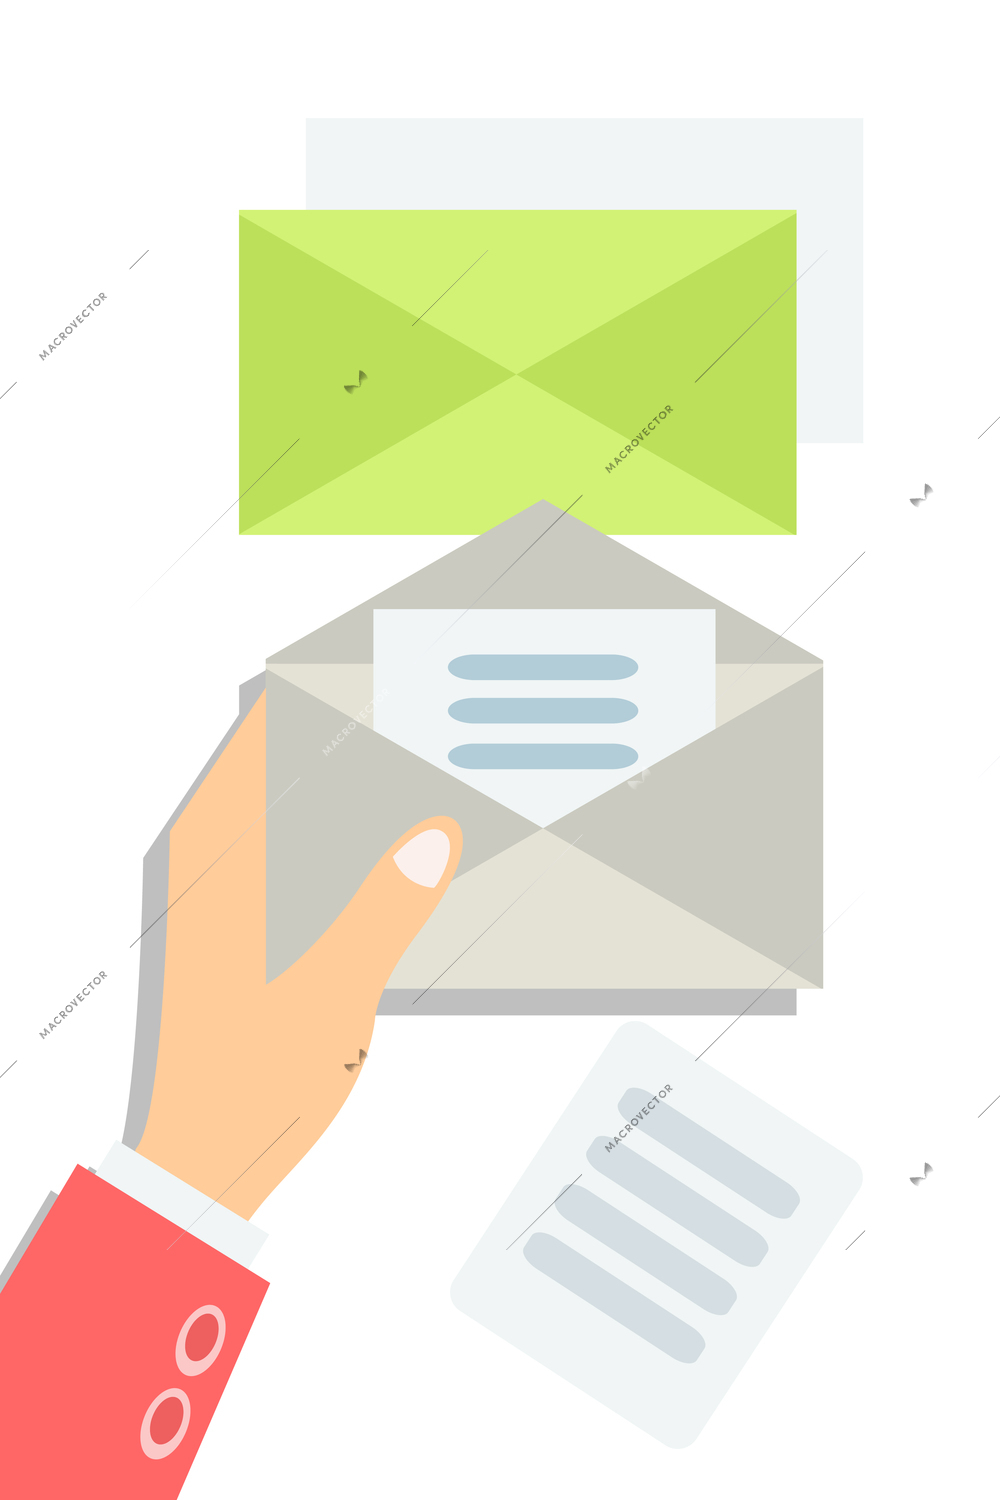 Business flat icon with hand envelope mail vector illustration